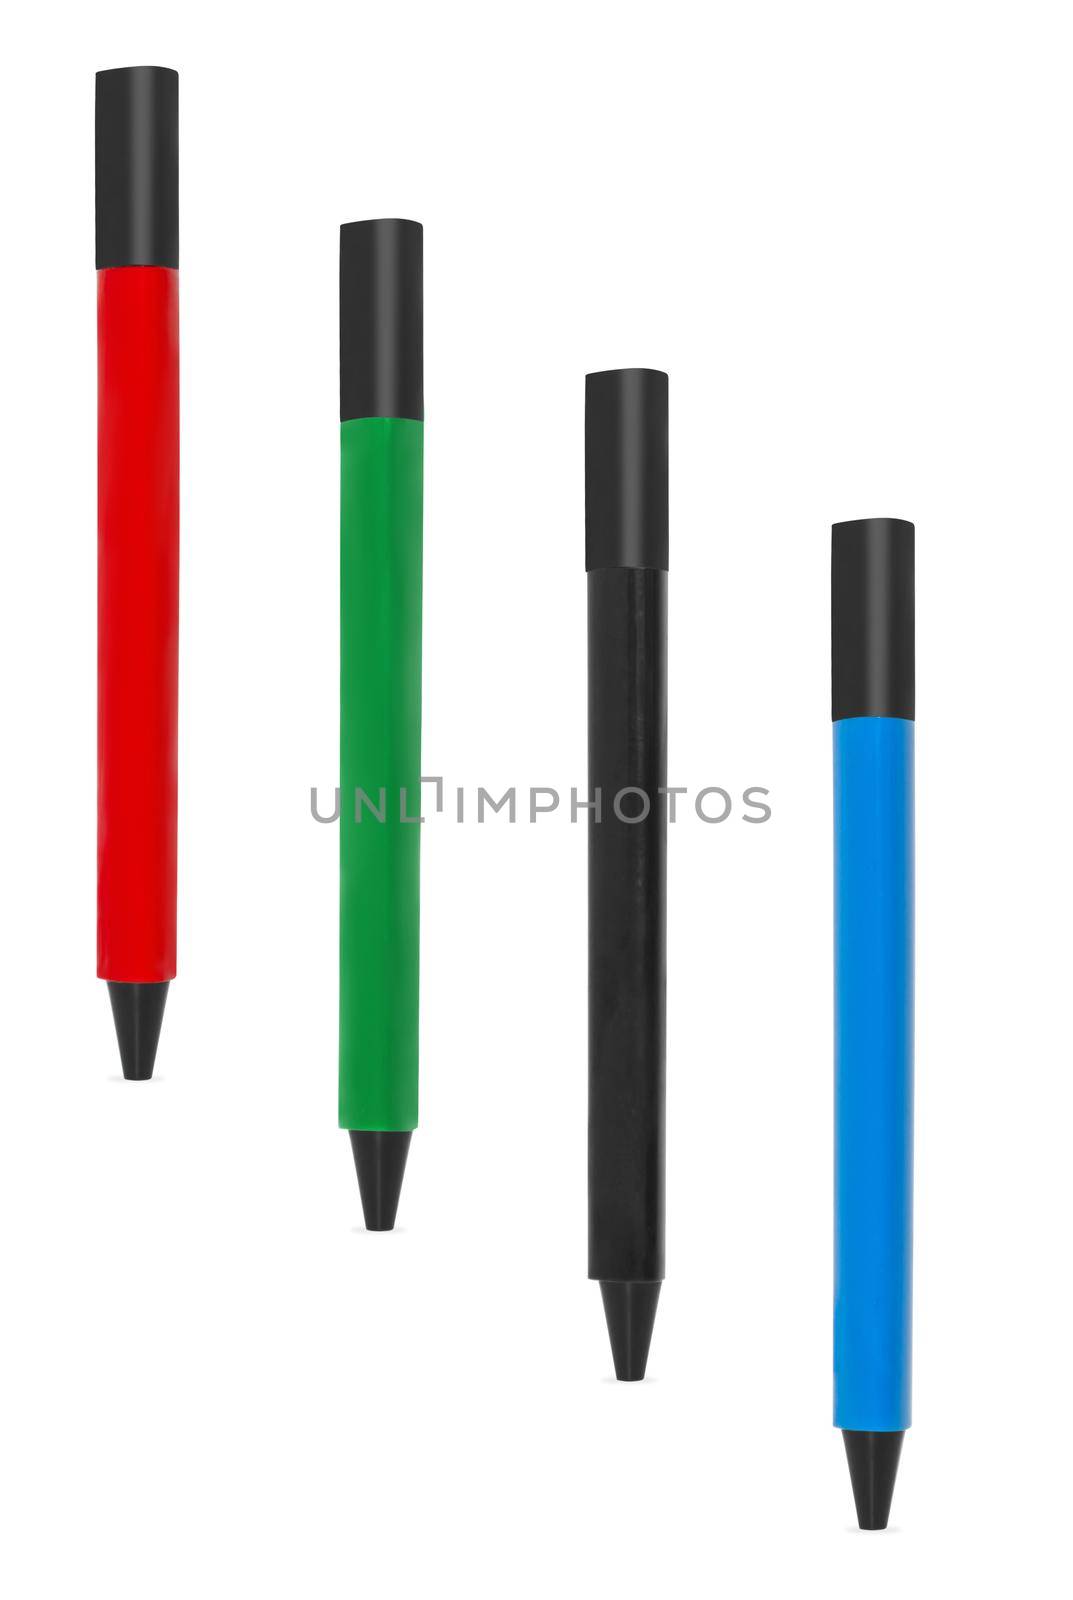 pens for writing on a white background in isolation, collage